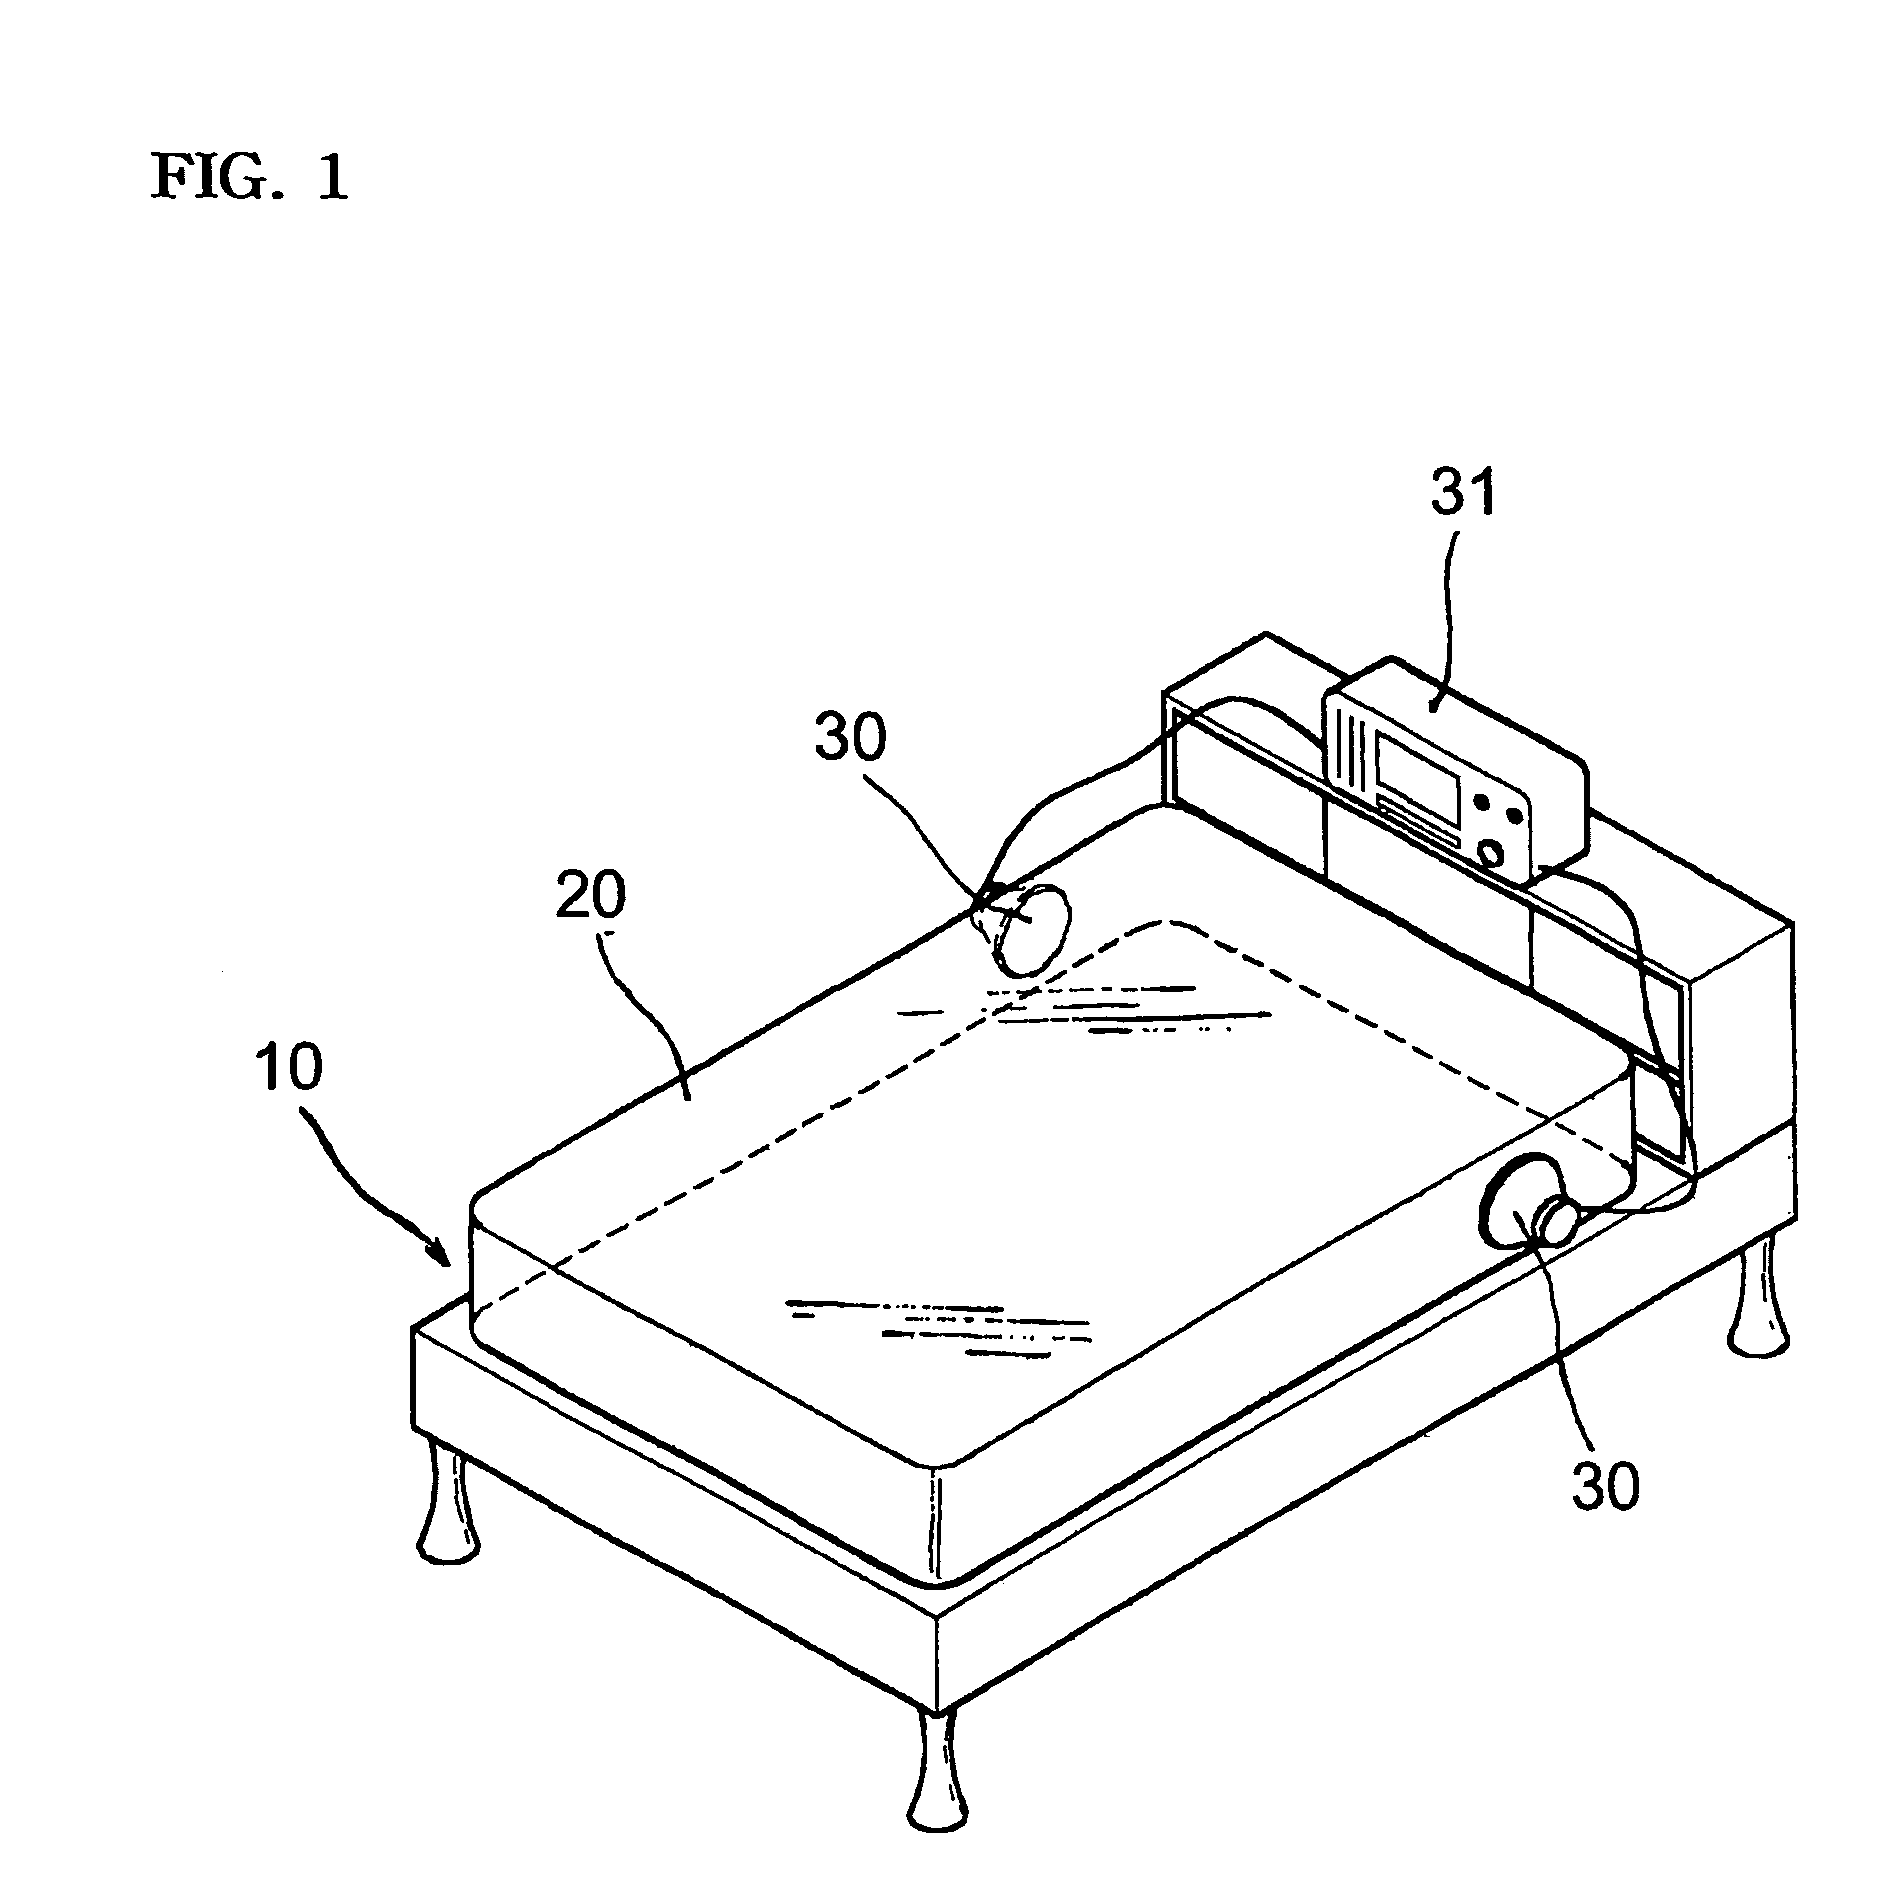 Acoustic vibration system with speaker for air mattresses